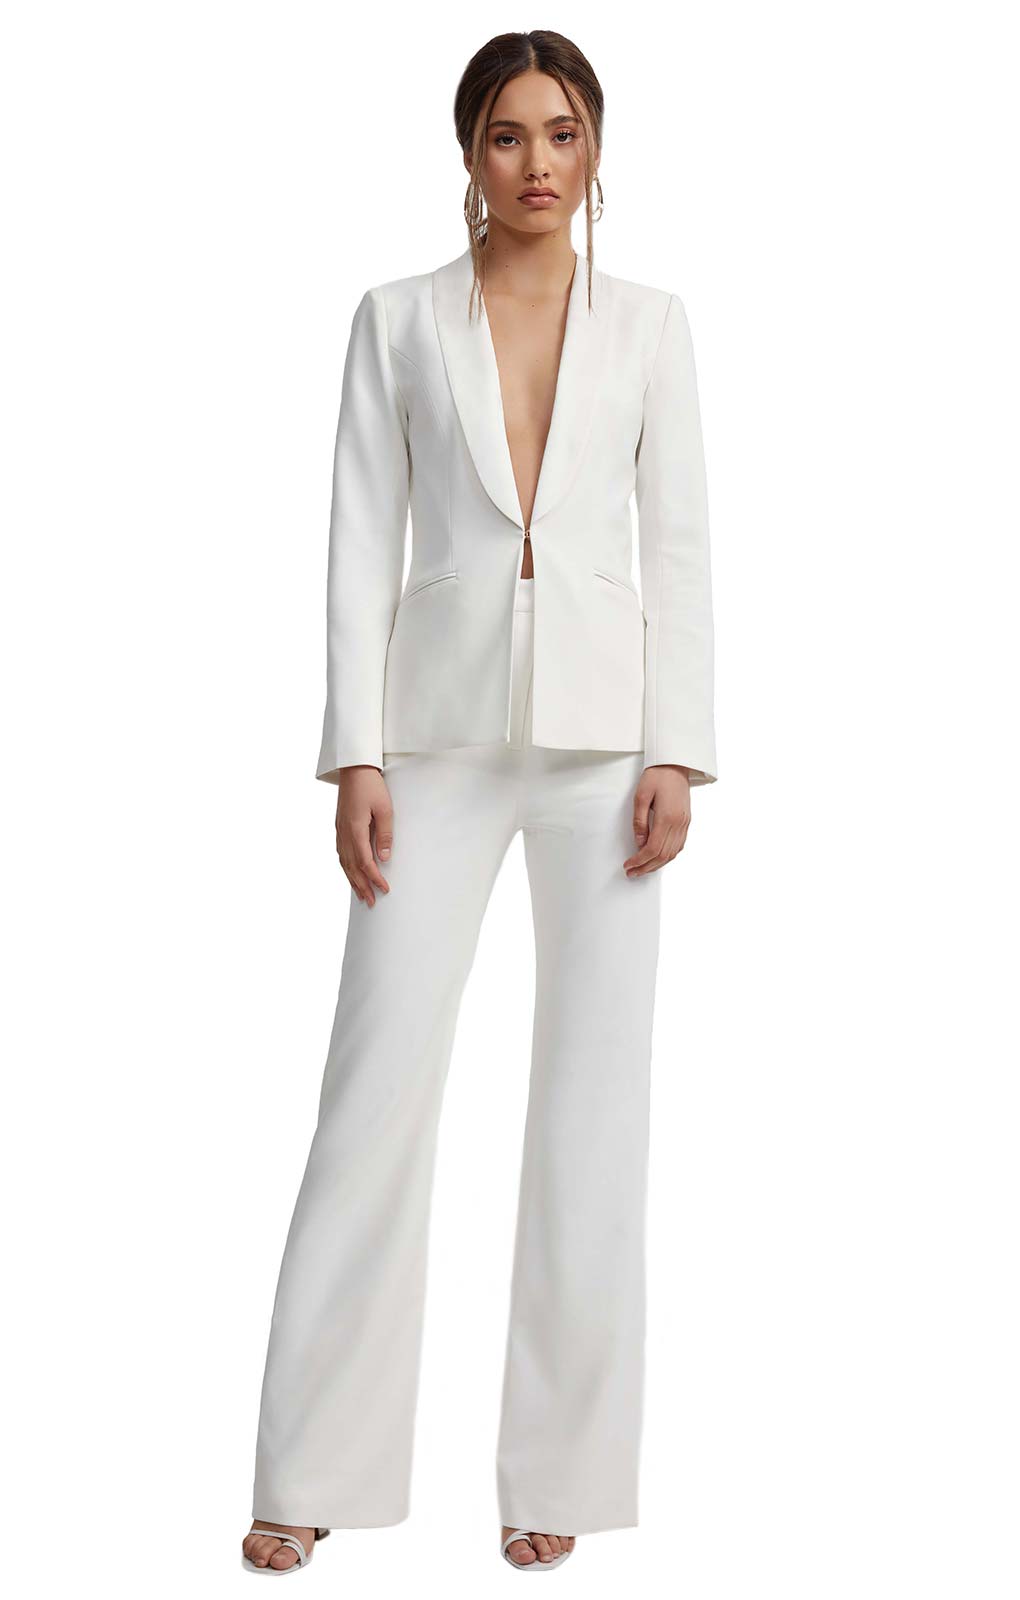 Lexi White Daisy Jacket & Donna Trouser Co-Ord